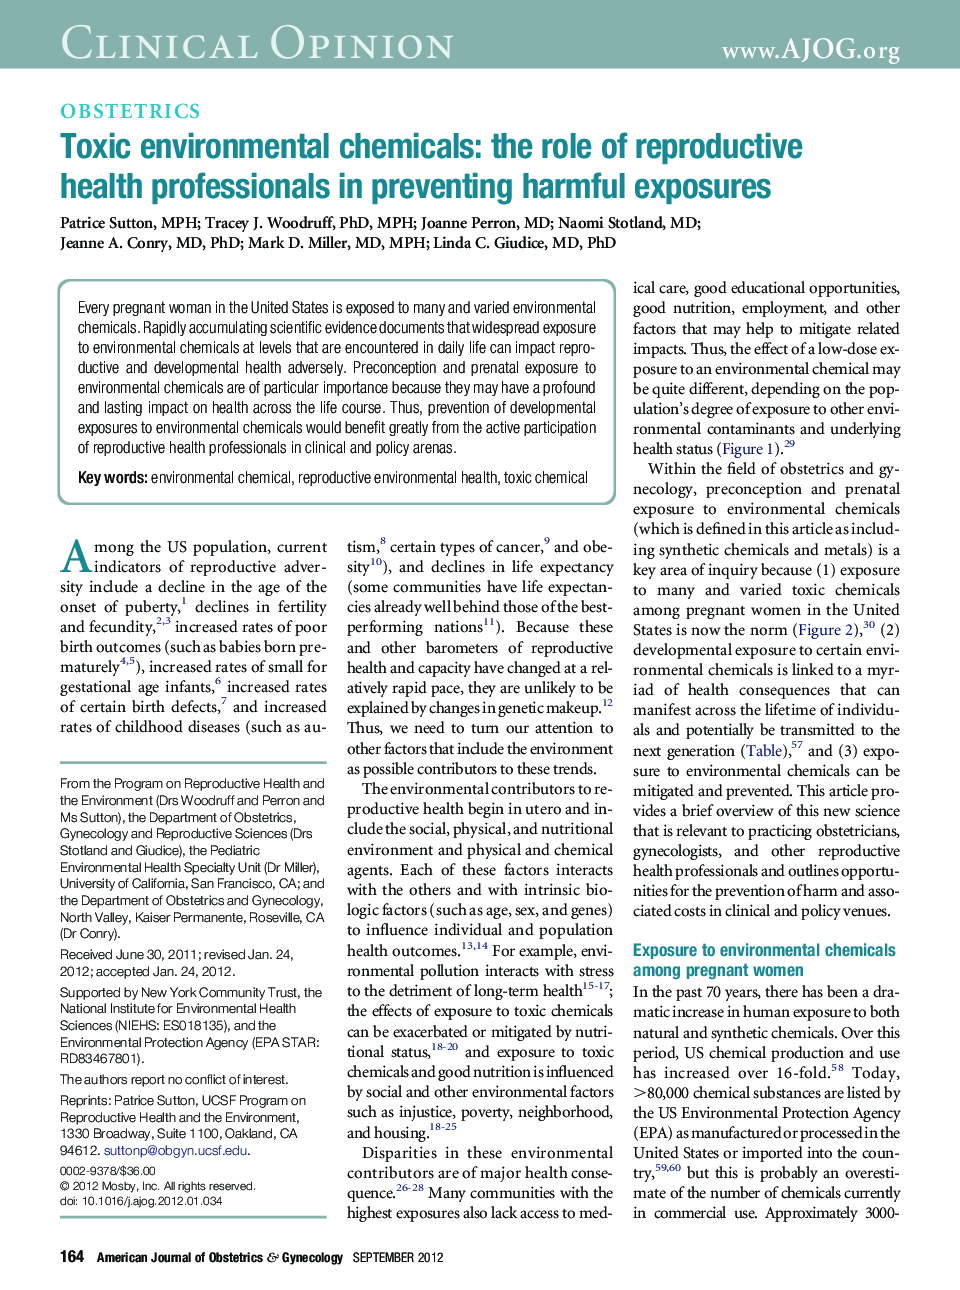 Toxic environmental chemicals: the role of reproductive health professionals in preventing harmful exposures 